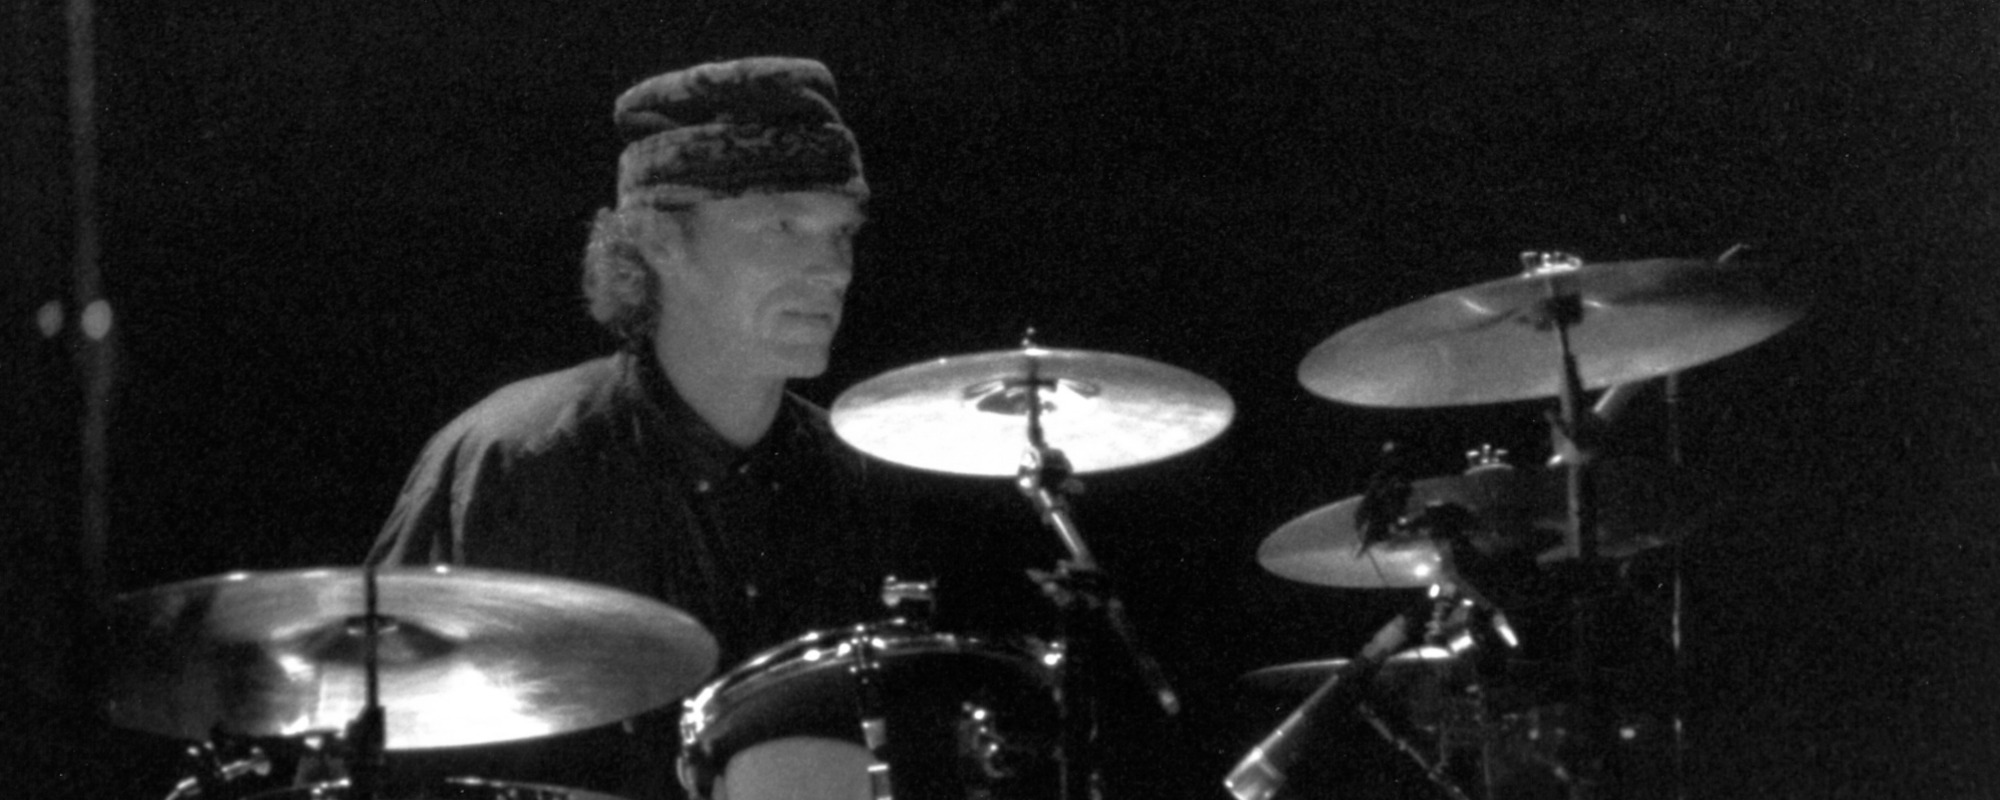 Morphine Drummer Billy Conway Dies at 65: “He Was The Mark Twain of My Generation”